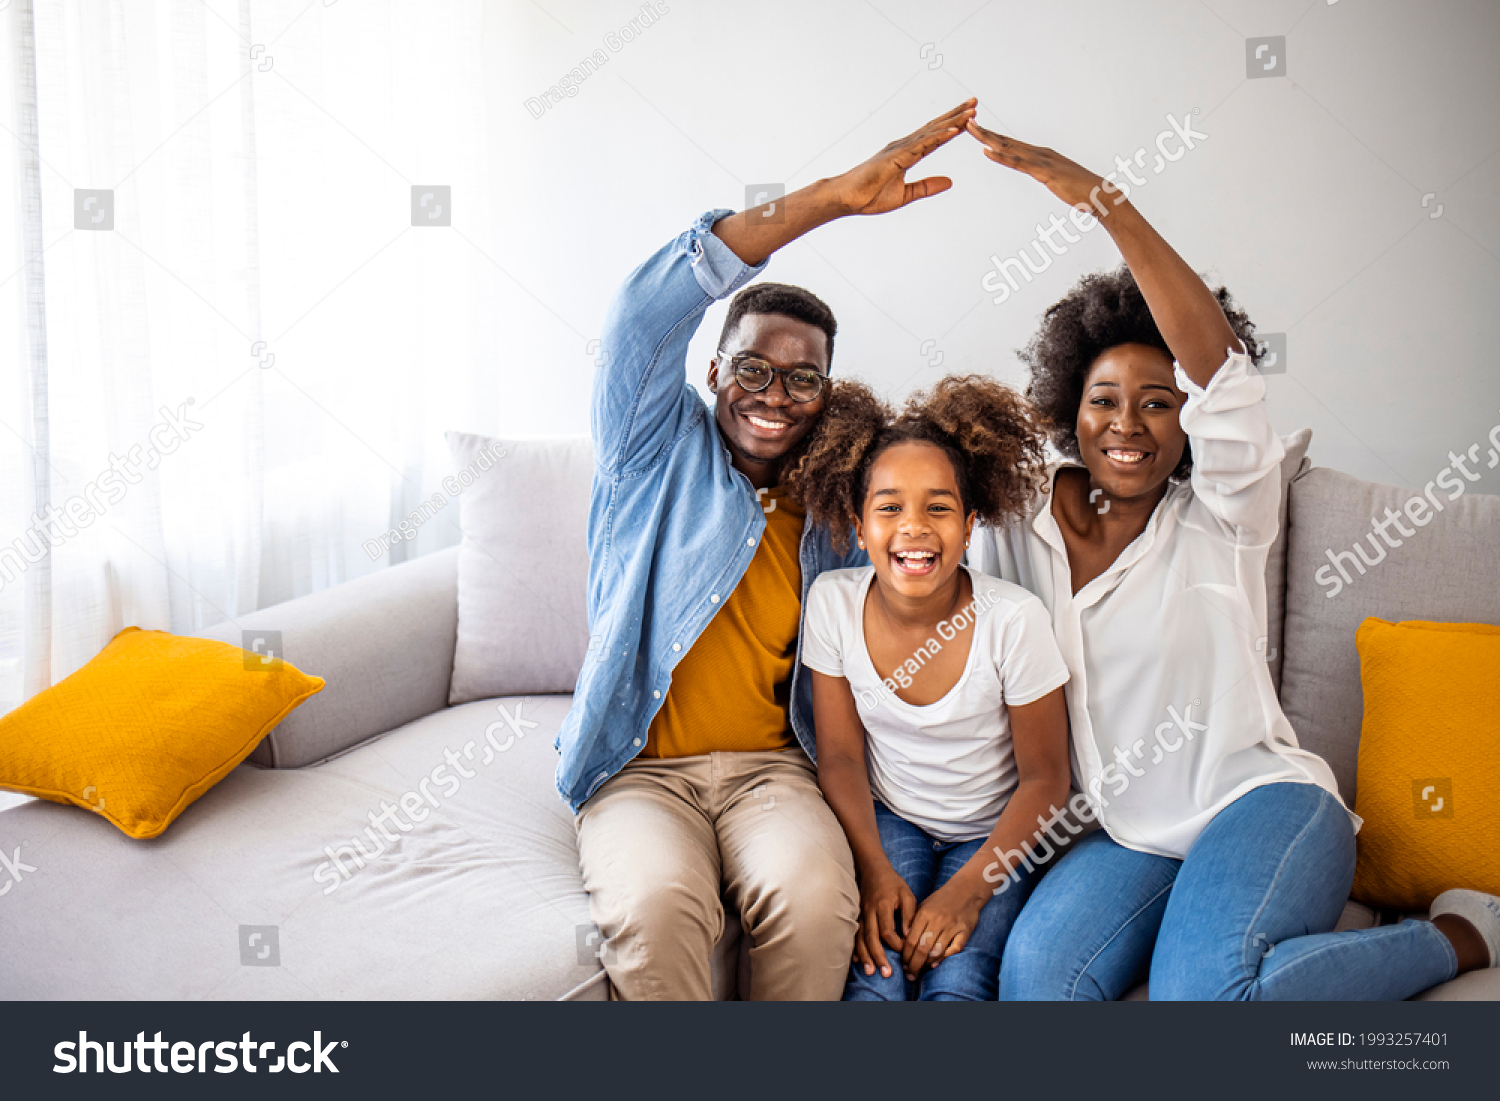 Happy family forming house roof with their hands at home. Insurance concept. Concept of housing and relocation. happy family mother father and kids with roof at home #1993257401